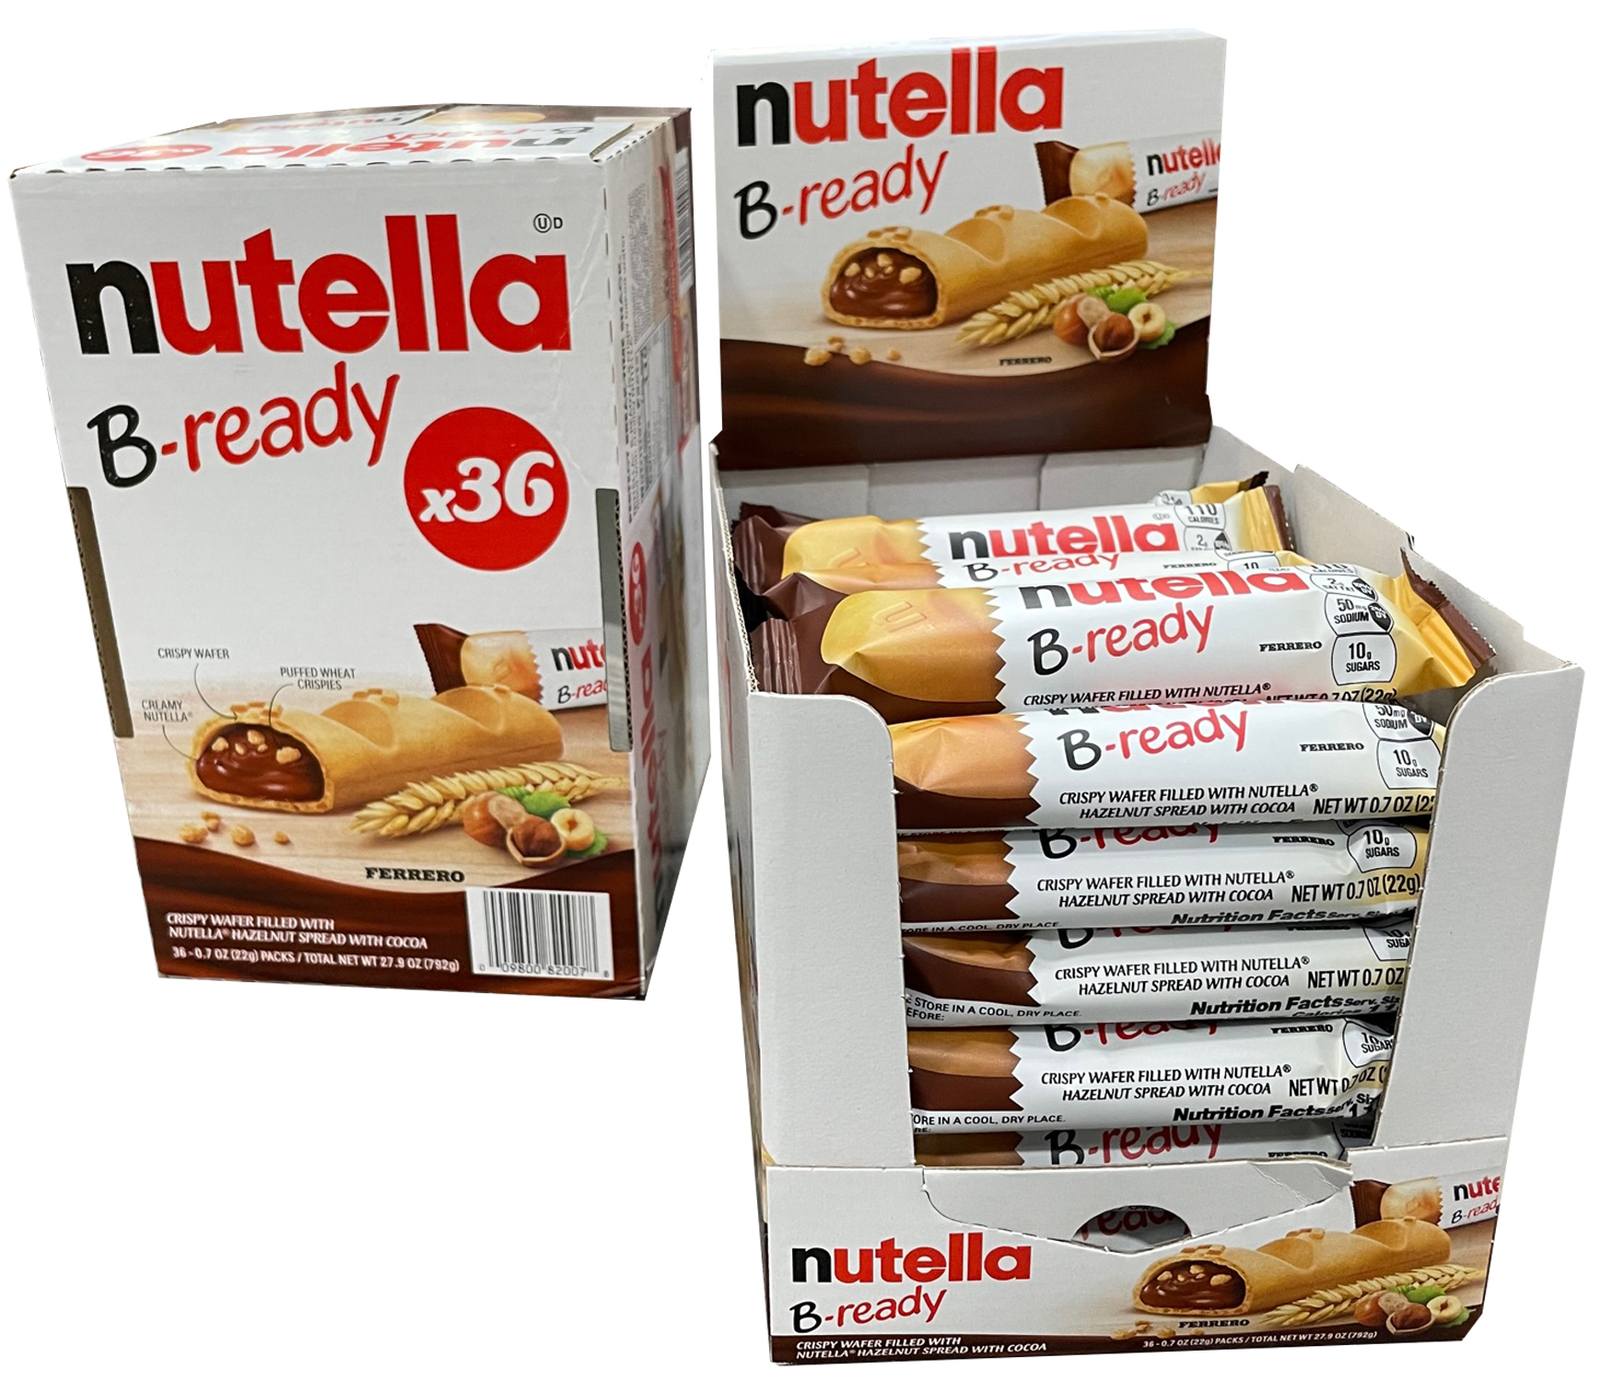 Nutella B-Ready 36 Ct Crispy Wafer Filled With Nutella Hazenut Spread With Cocoa - $30.95